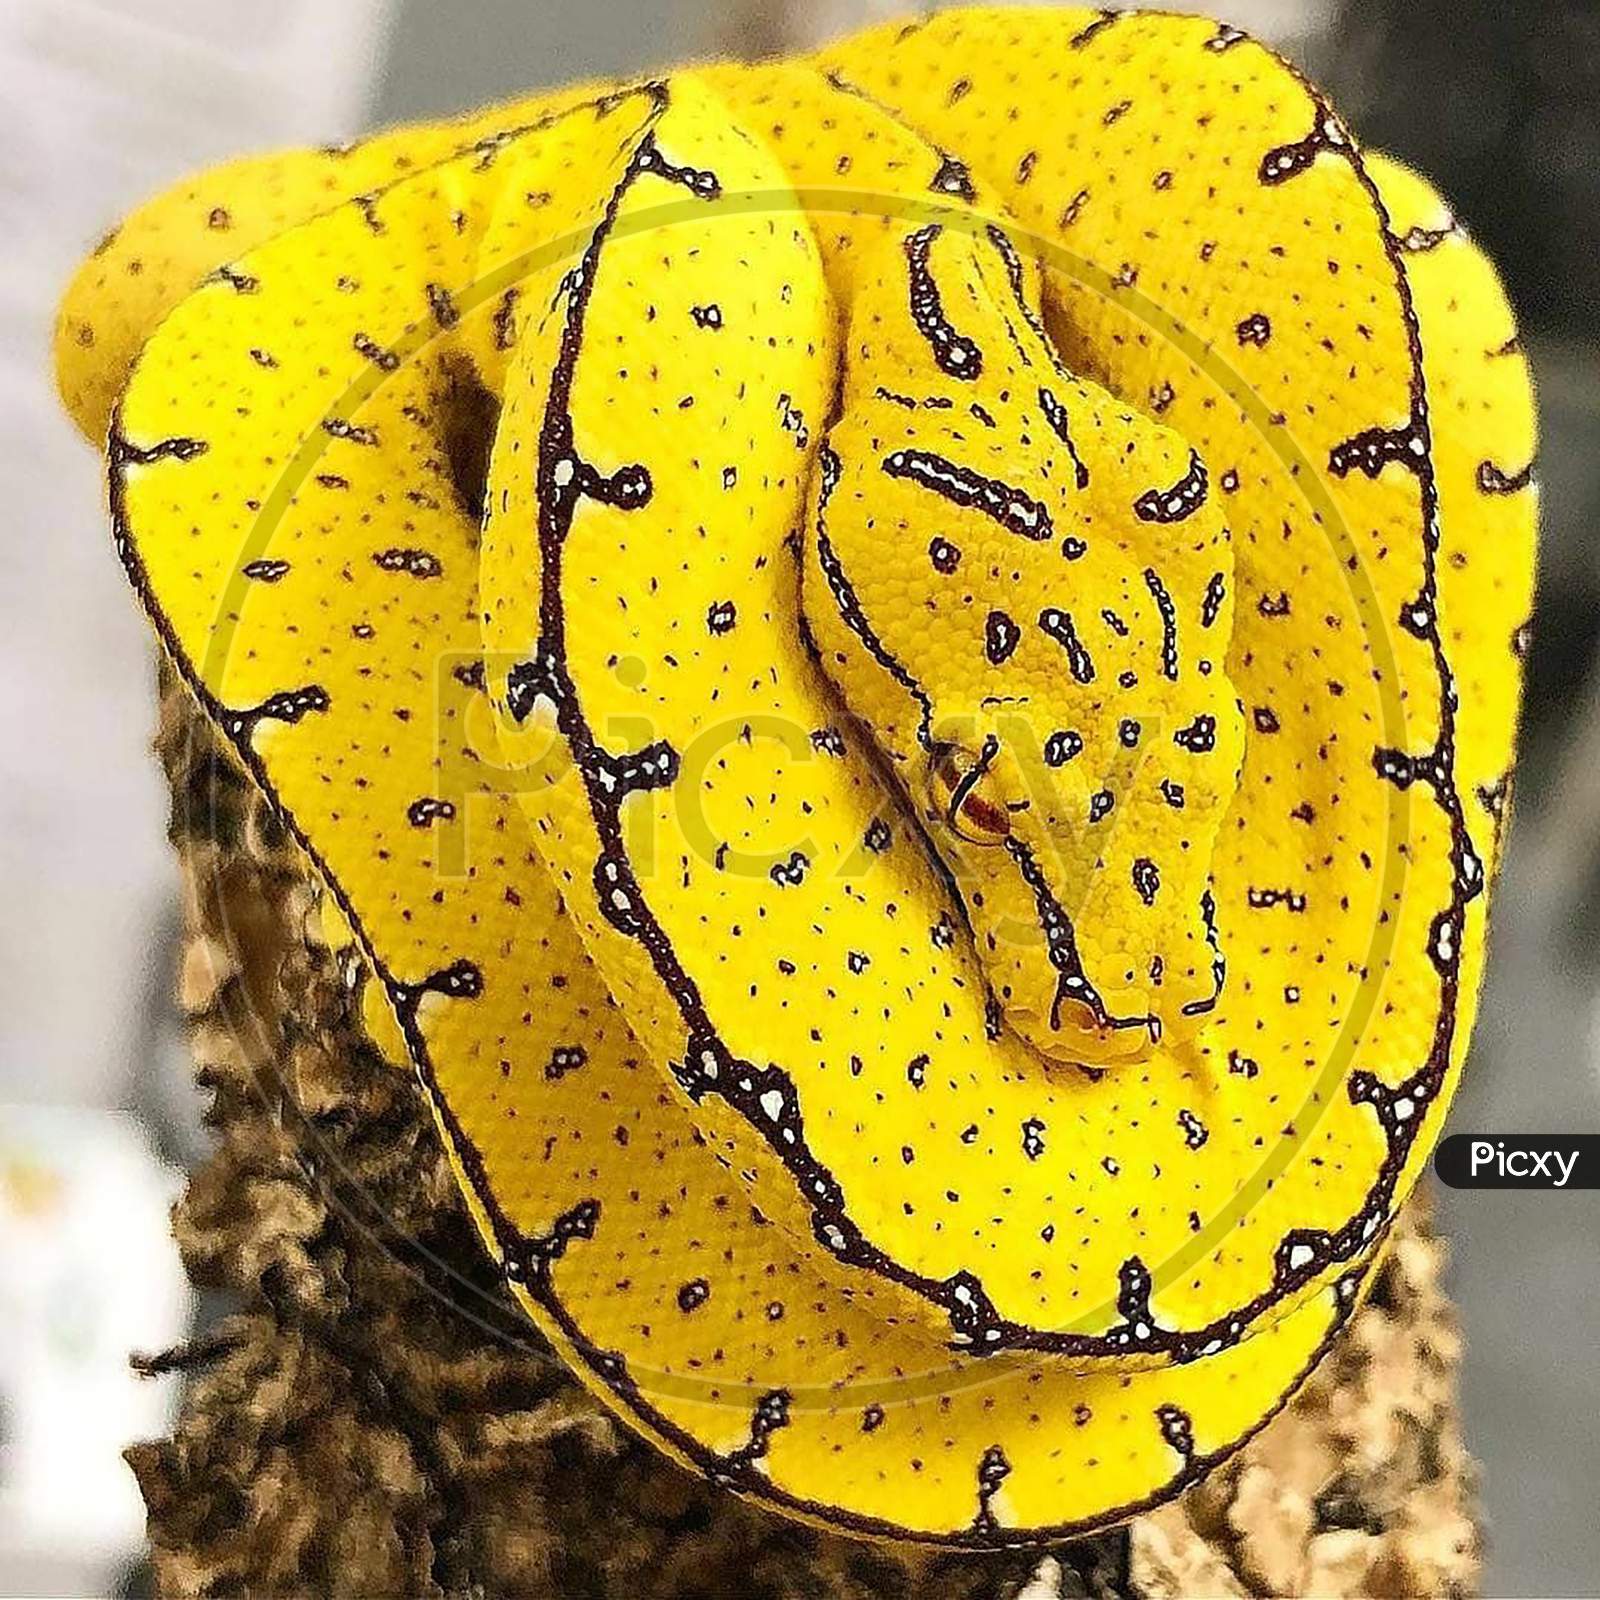 This is a yellow snake viper